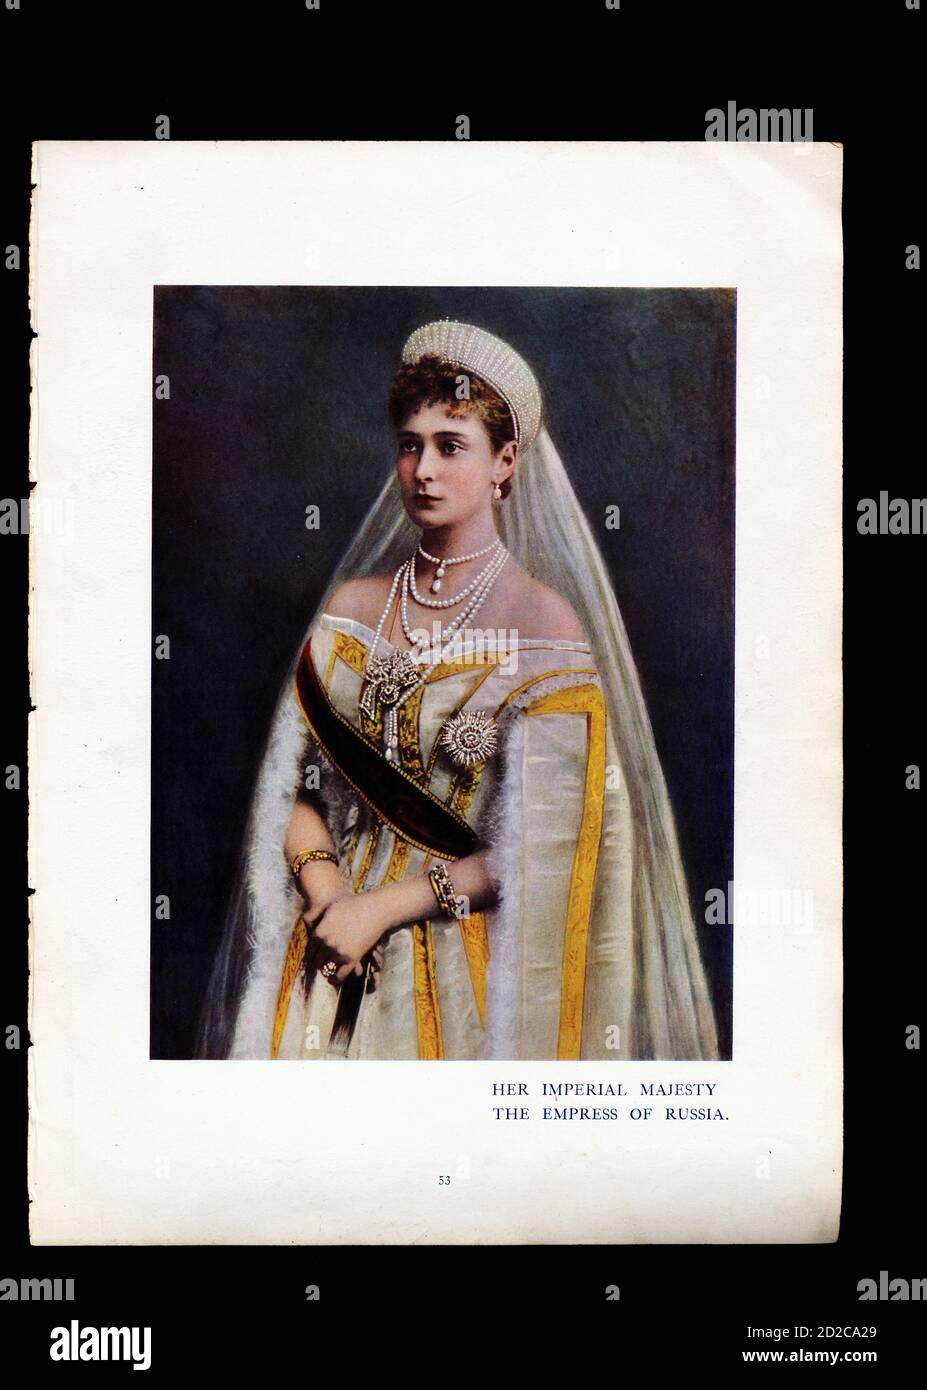 Chromolithographic portrait of Maria Feodorovna (26 November 1847 – 13 October 1928). She was Empress consort of Russia as spouse of Emperor Alexander Stock Photo